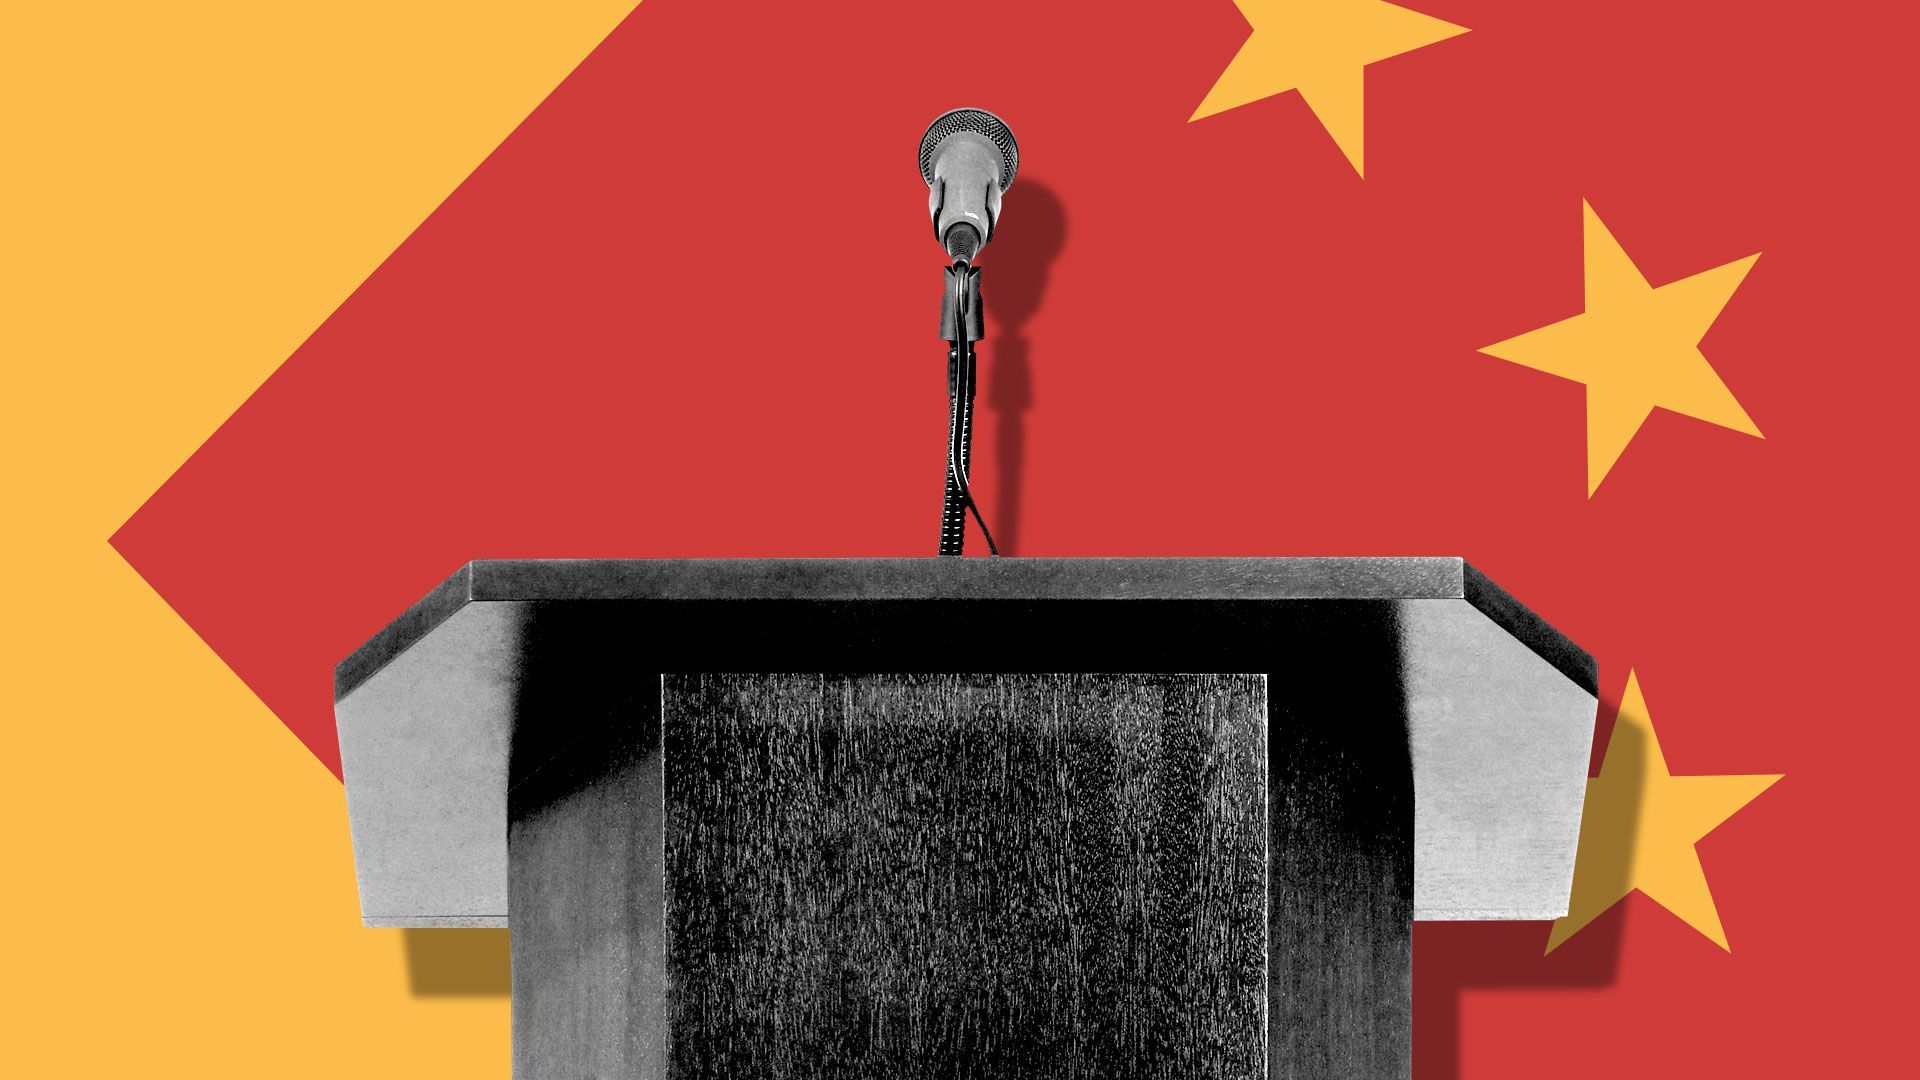 Illustration of podium with microphone in front of deconstructed Chinese flag